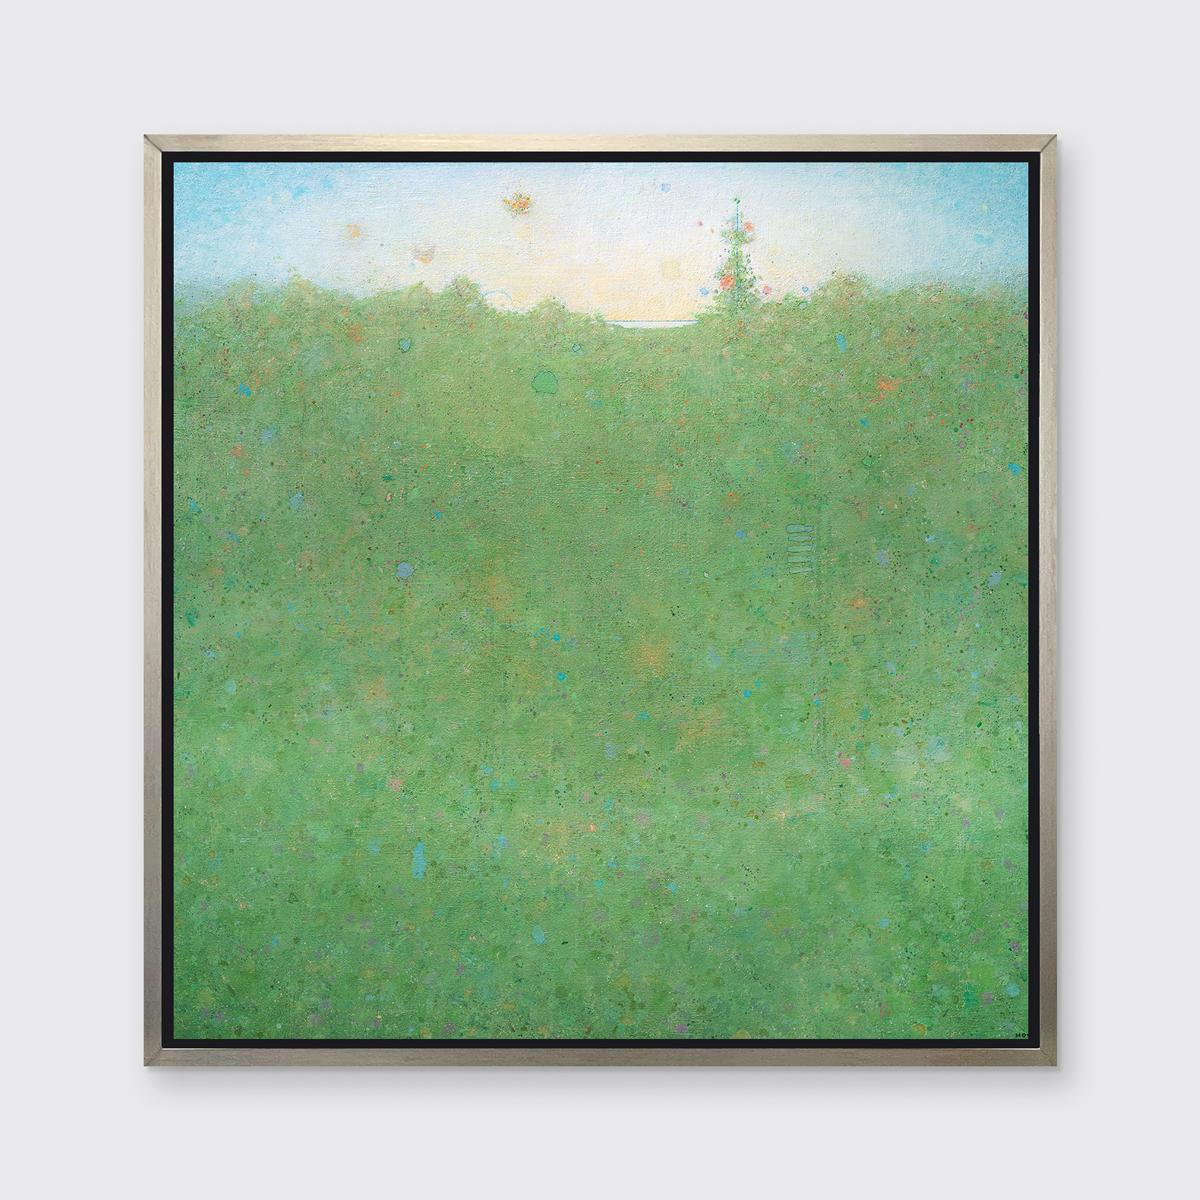 This abstract landscape limited edition print by Elwood Howell features a vibrant green palette. Colorful orange, blue, and violet accent the green area of the composition, which extends up to an imperfect horizon line that is reminiscent of foliage